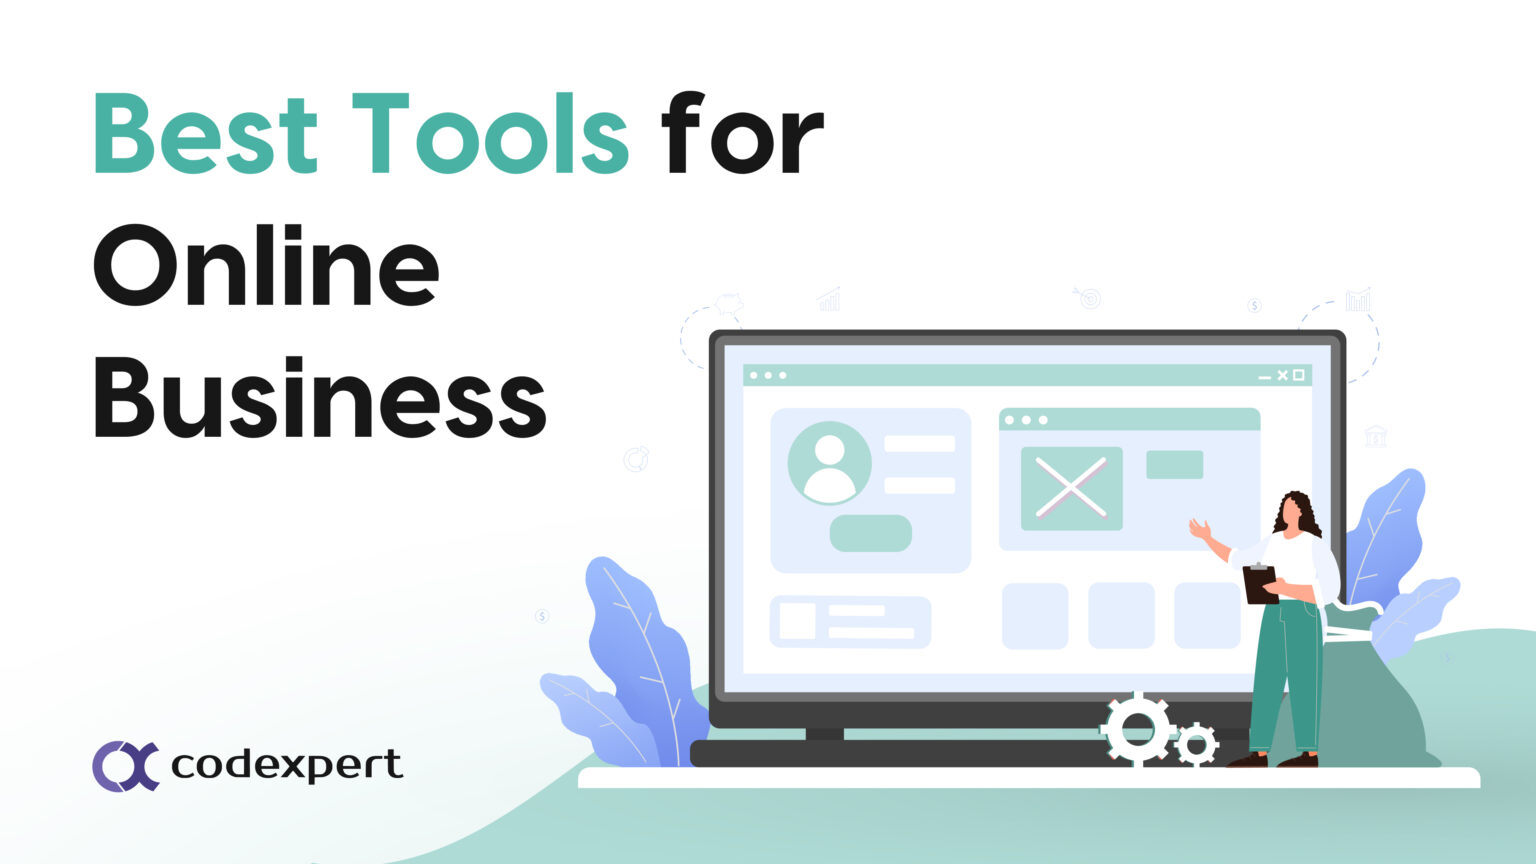 Best Tools for Online Business